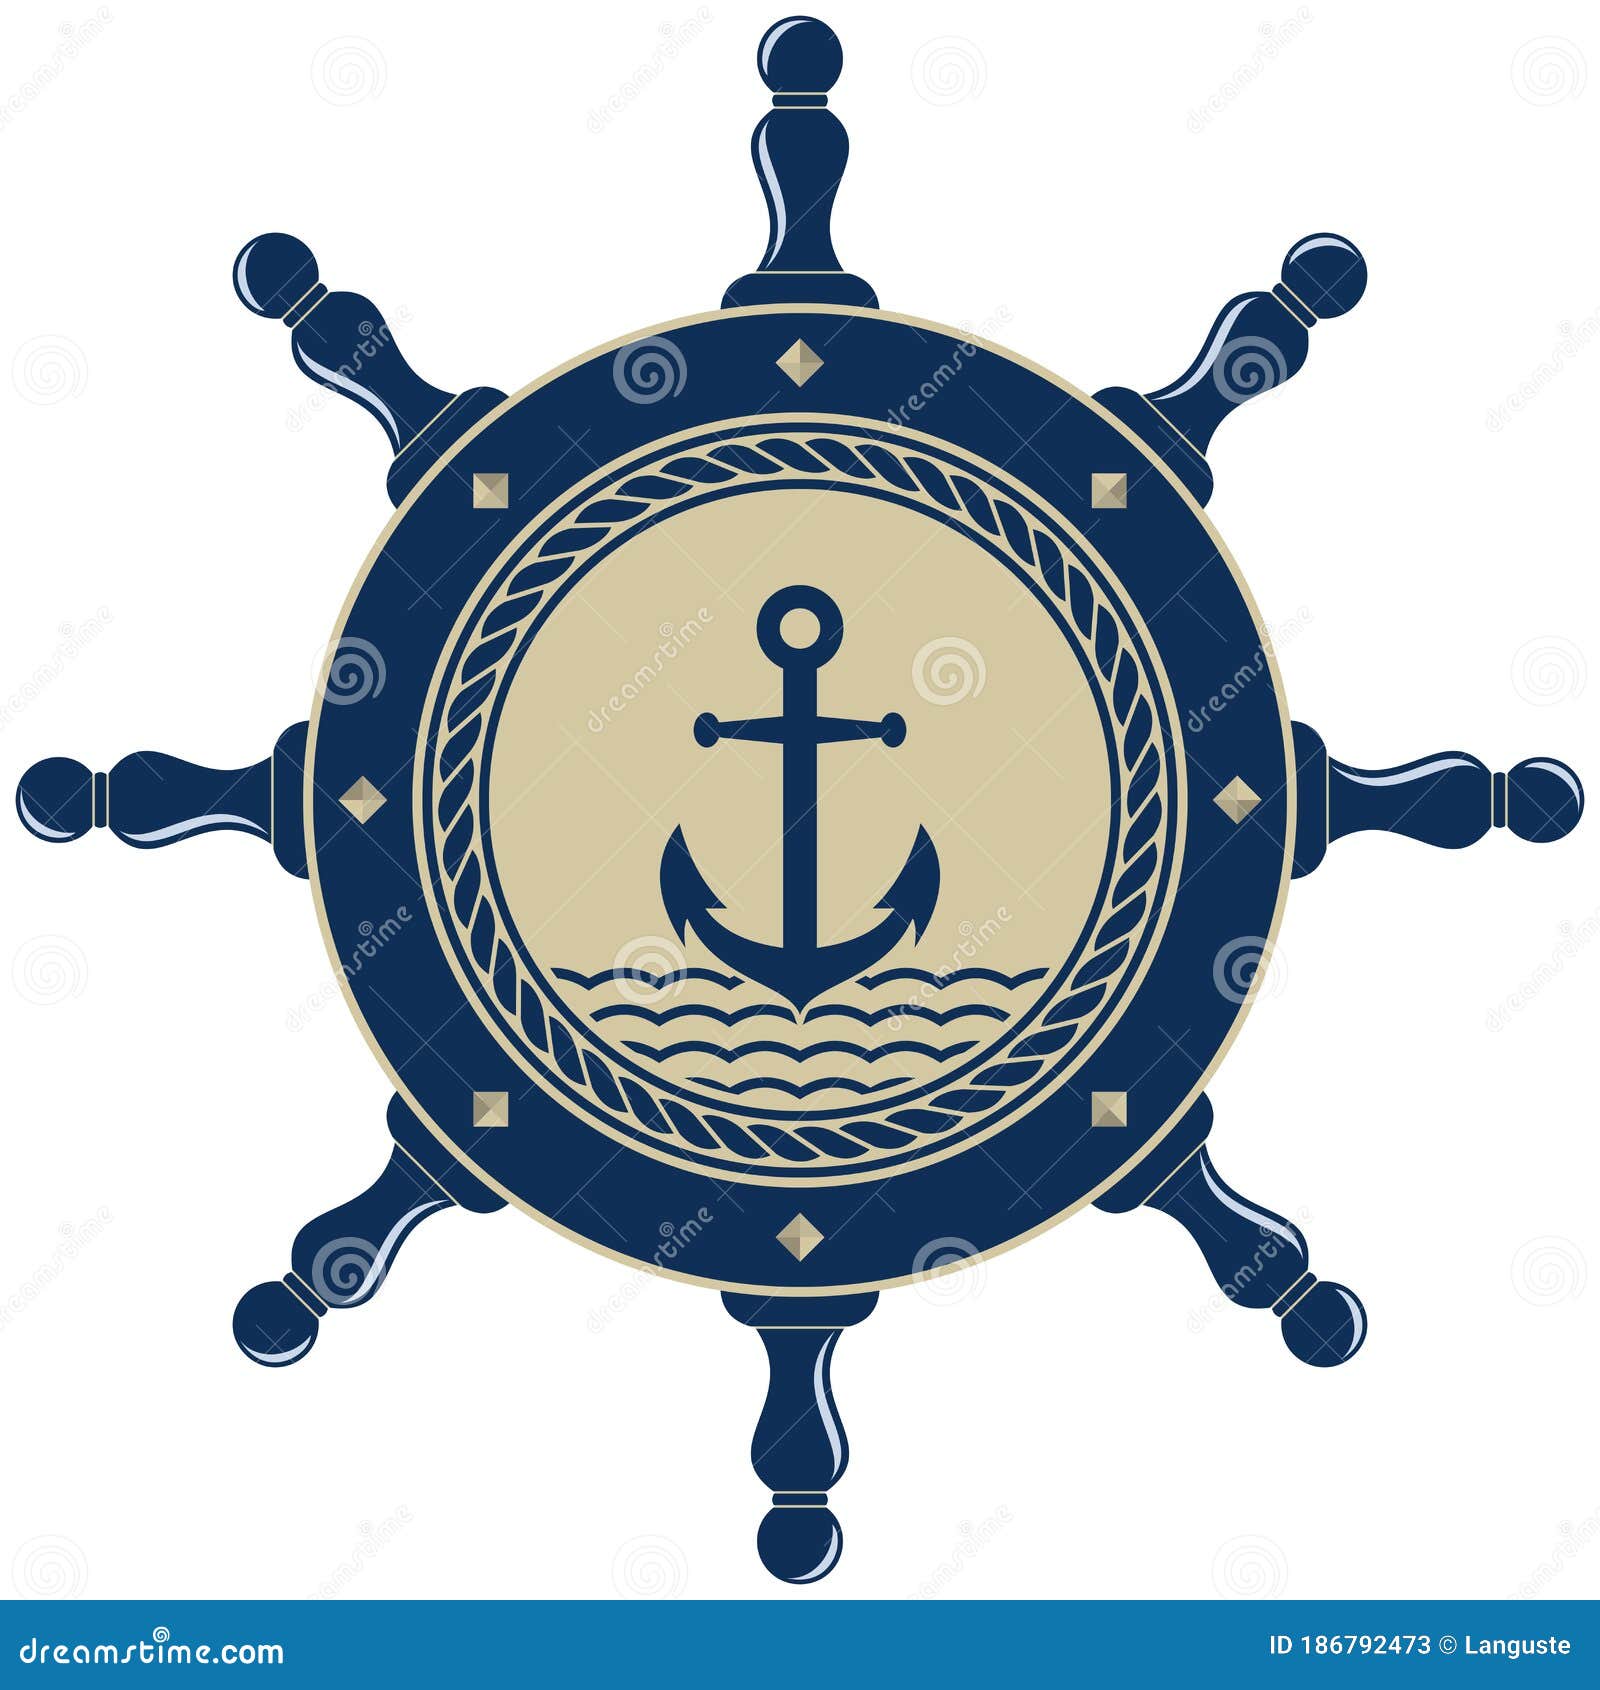 Nautical Steering Wheel Symbol with Anchor and Rope in Marine Blue